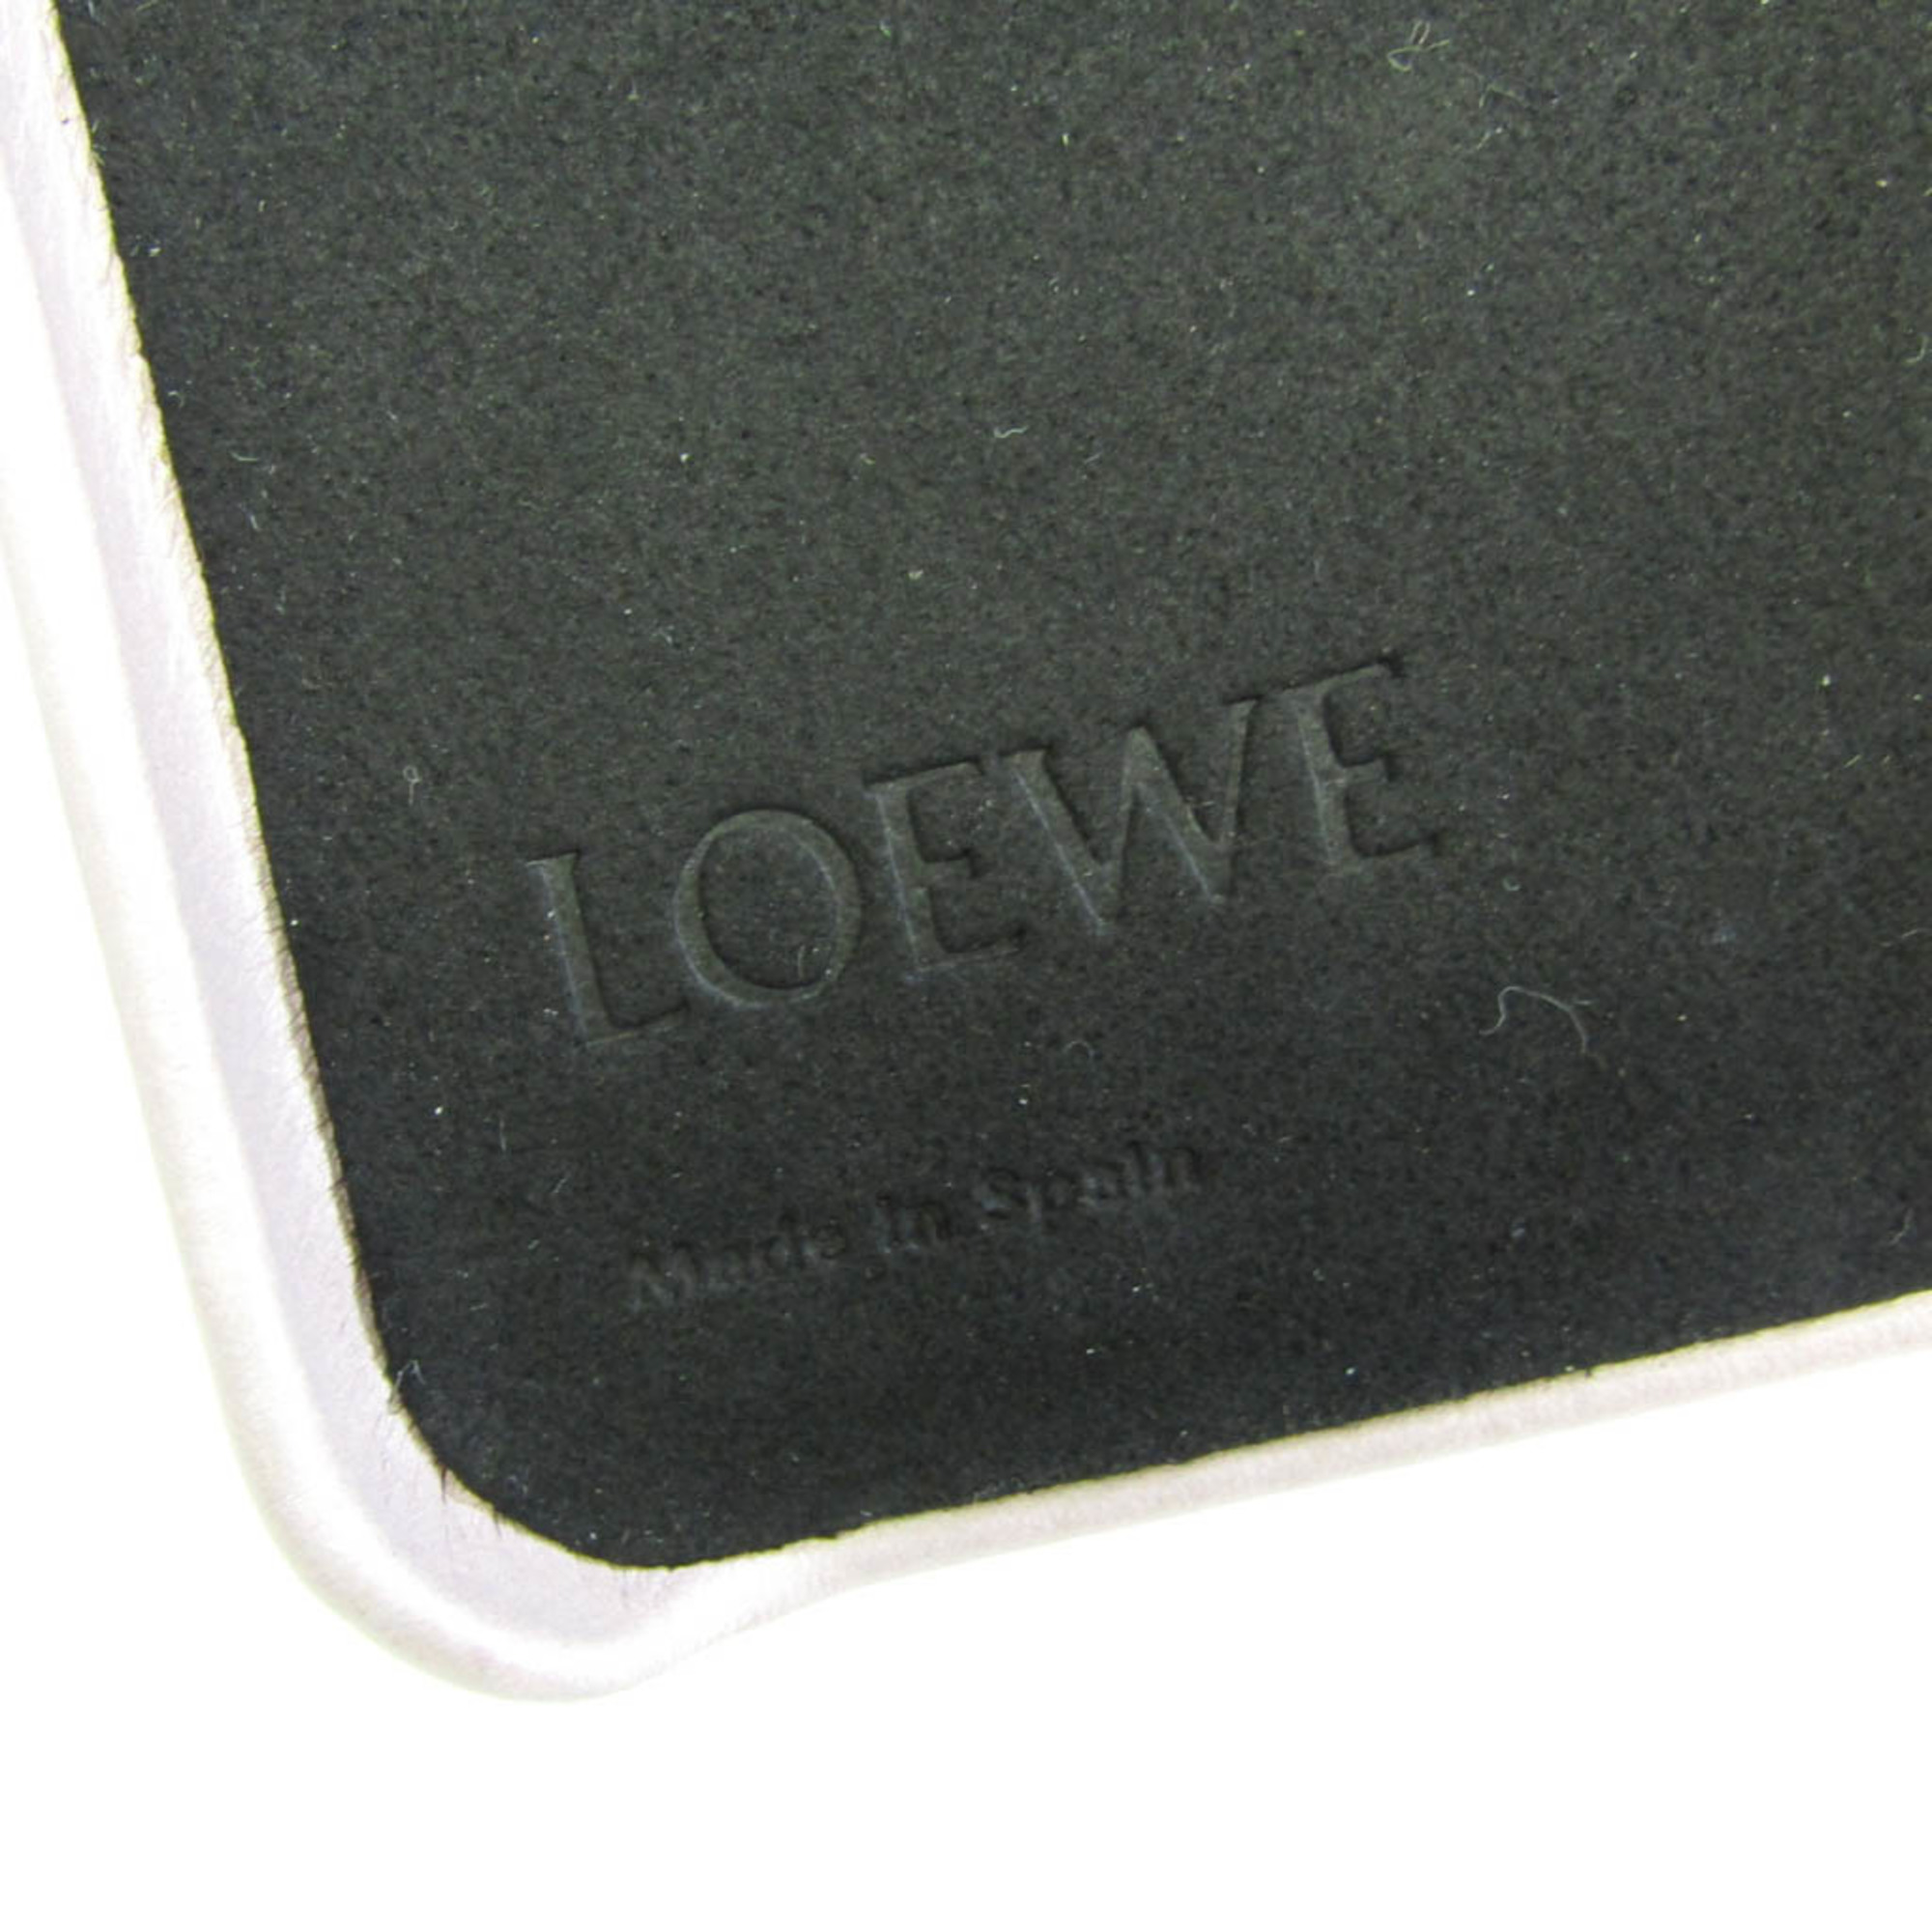 Loewe Leather Phone Bumper For IPhone X Pink elephant